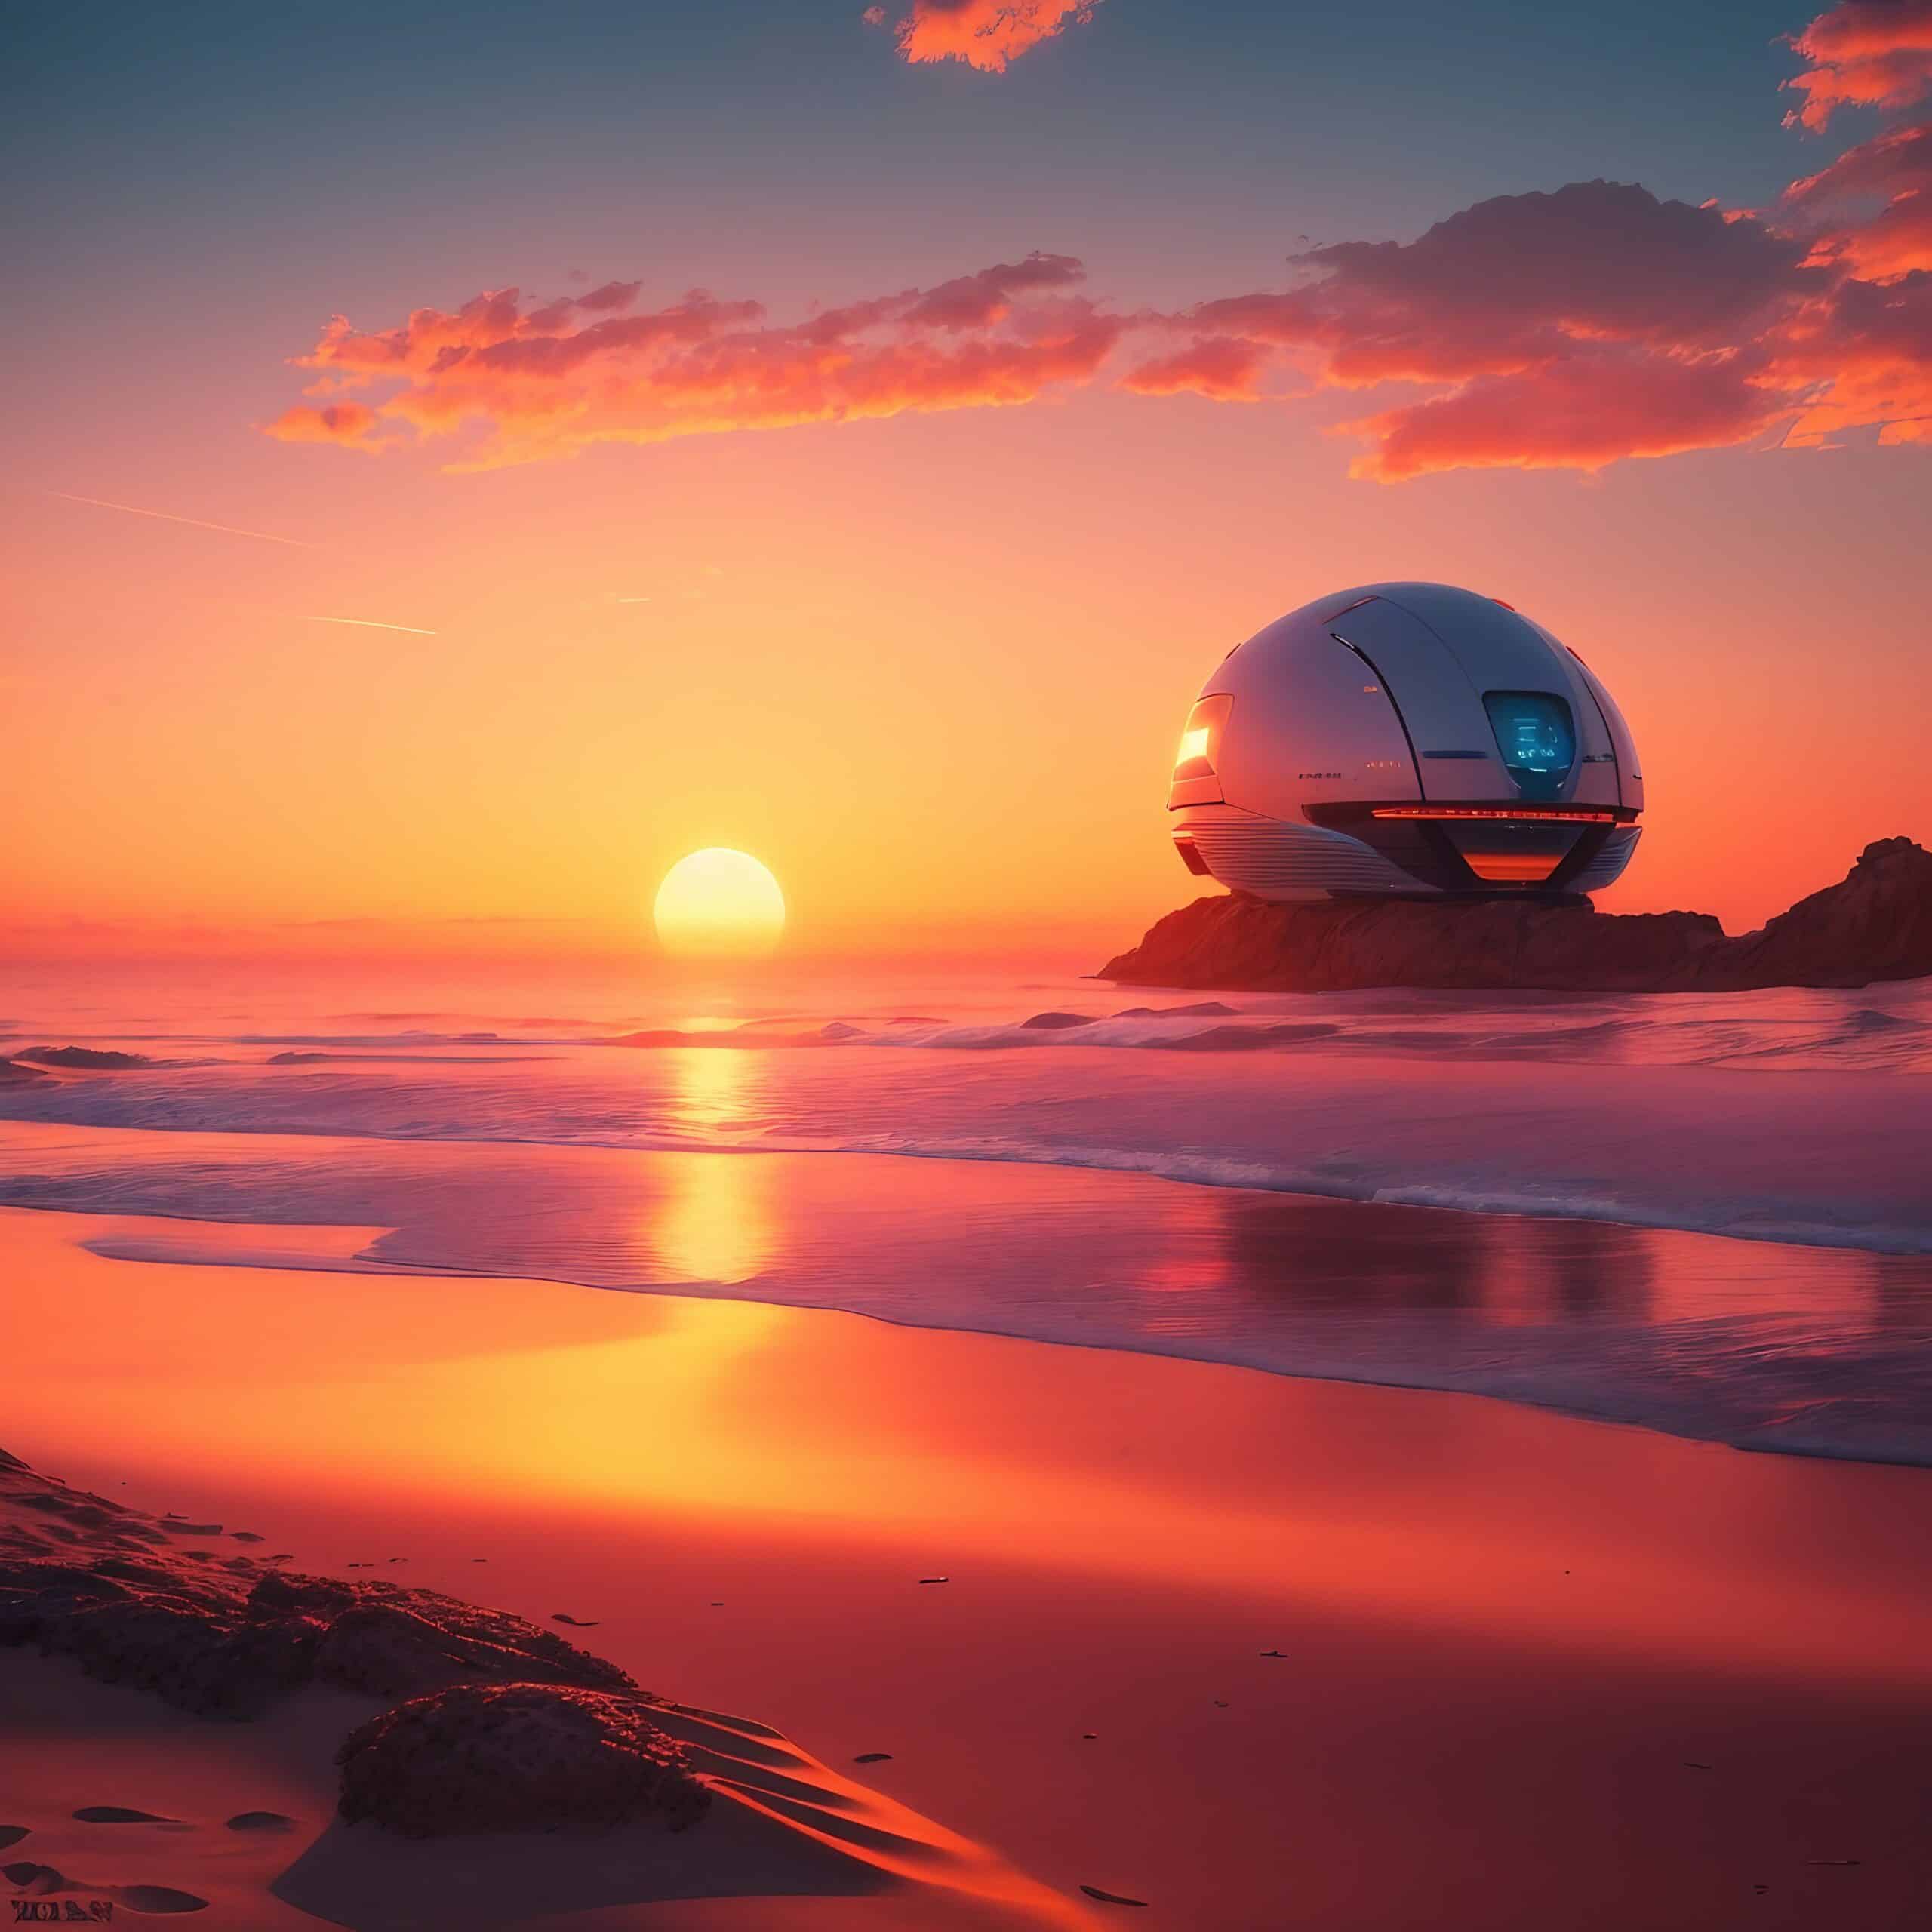 dystopian beach during sunset with a futuristic dome house in the distance